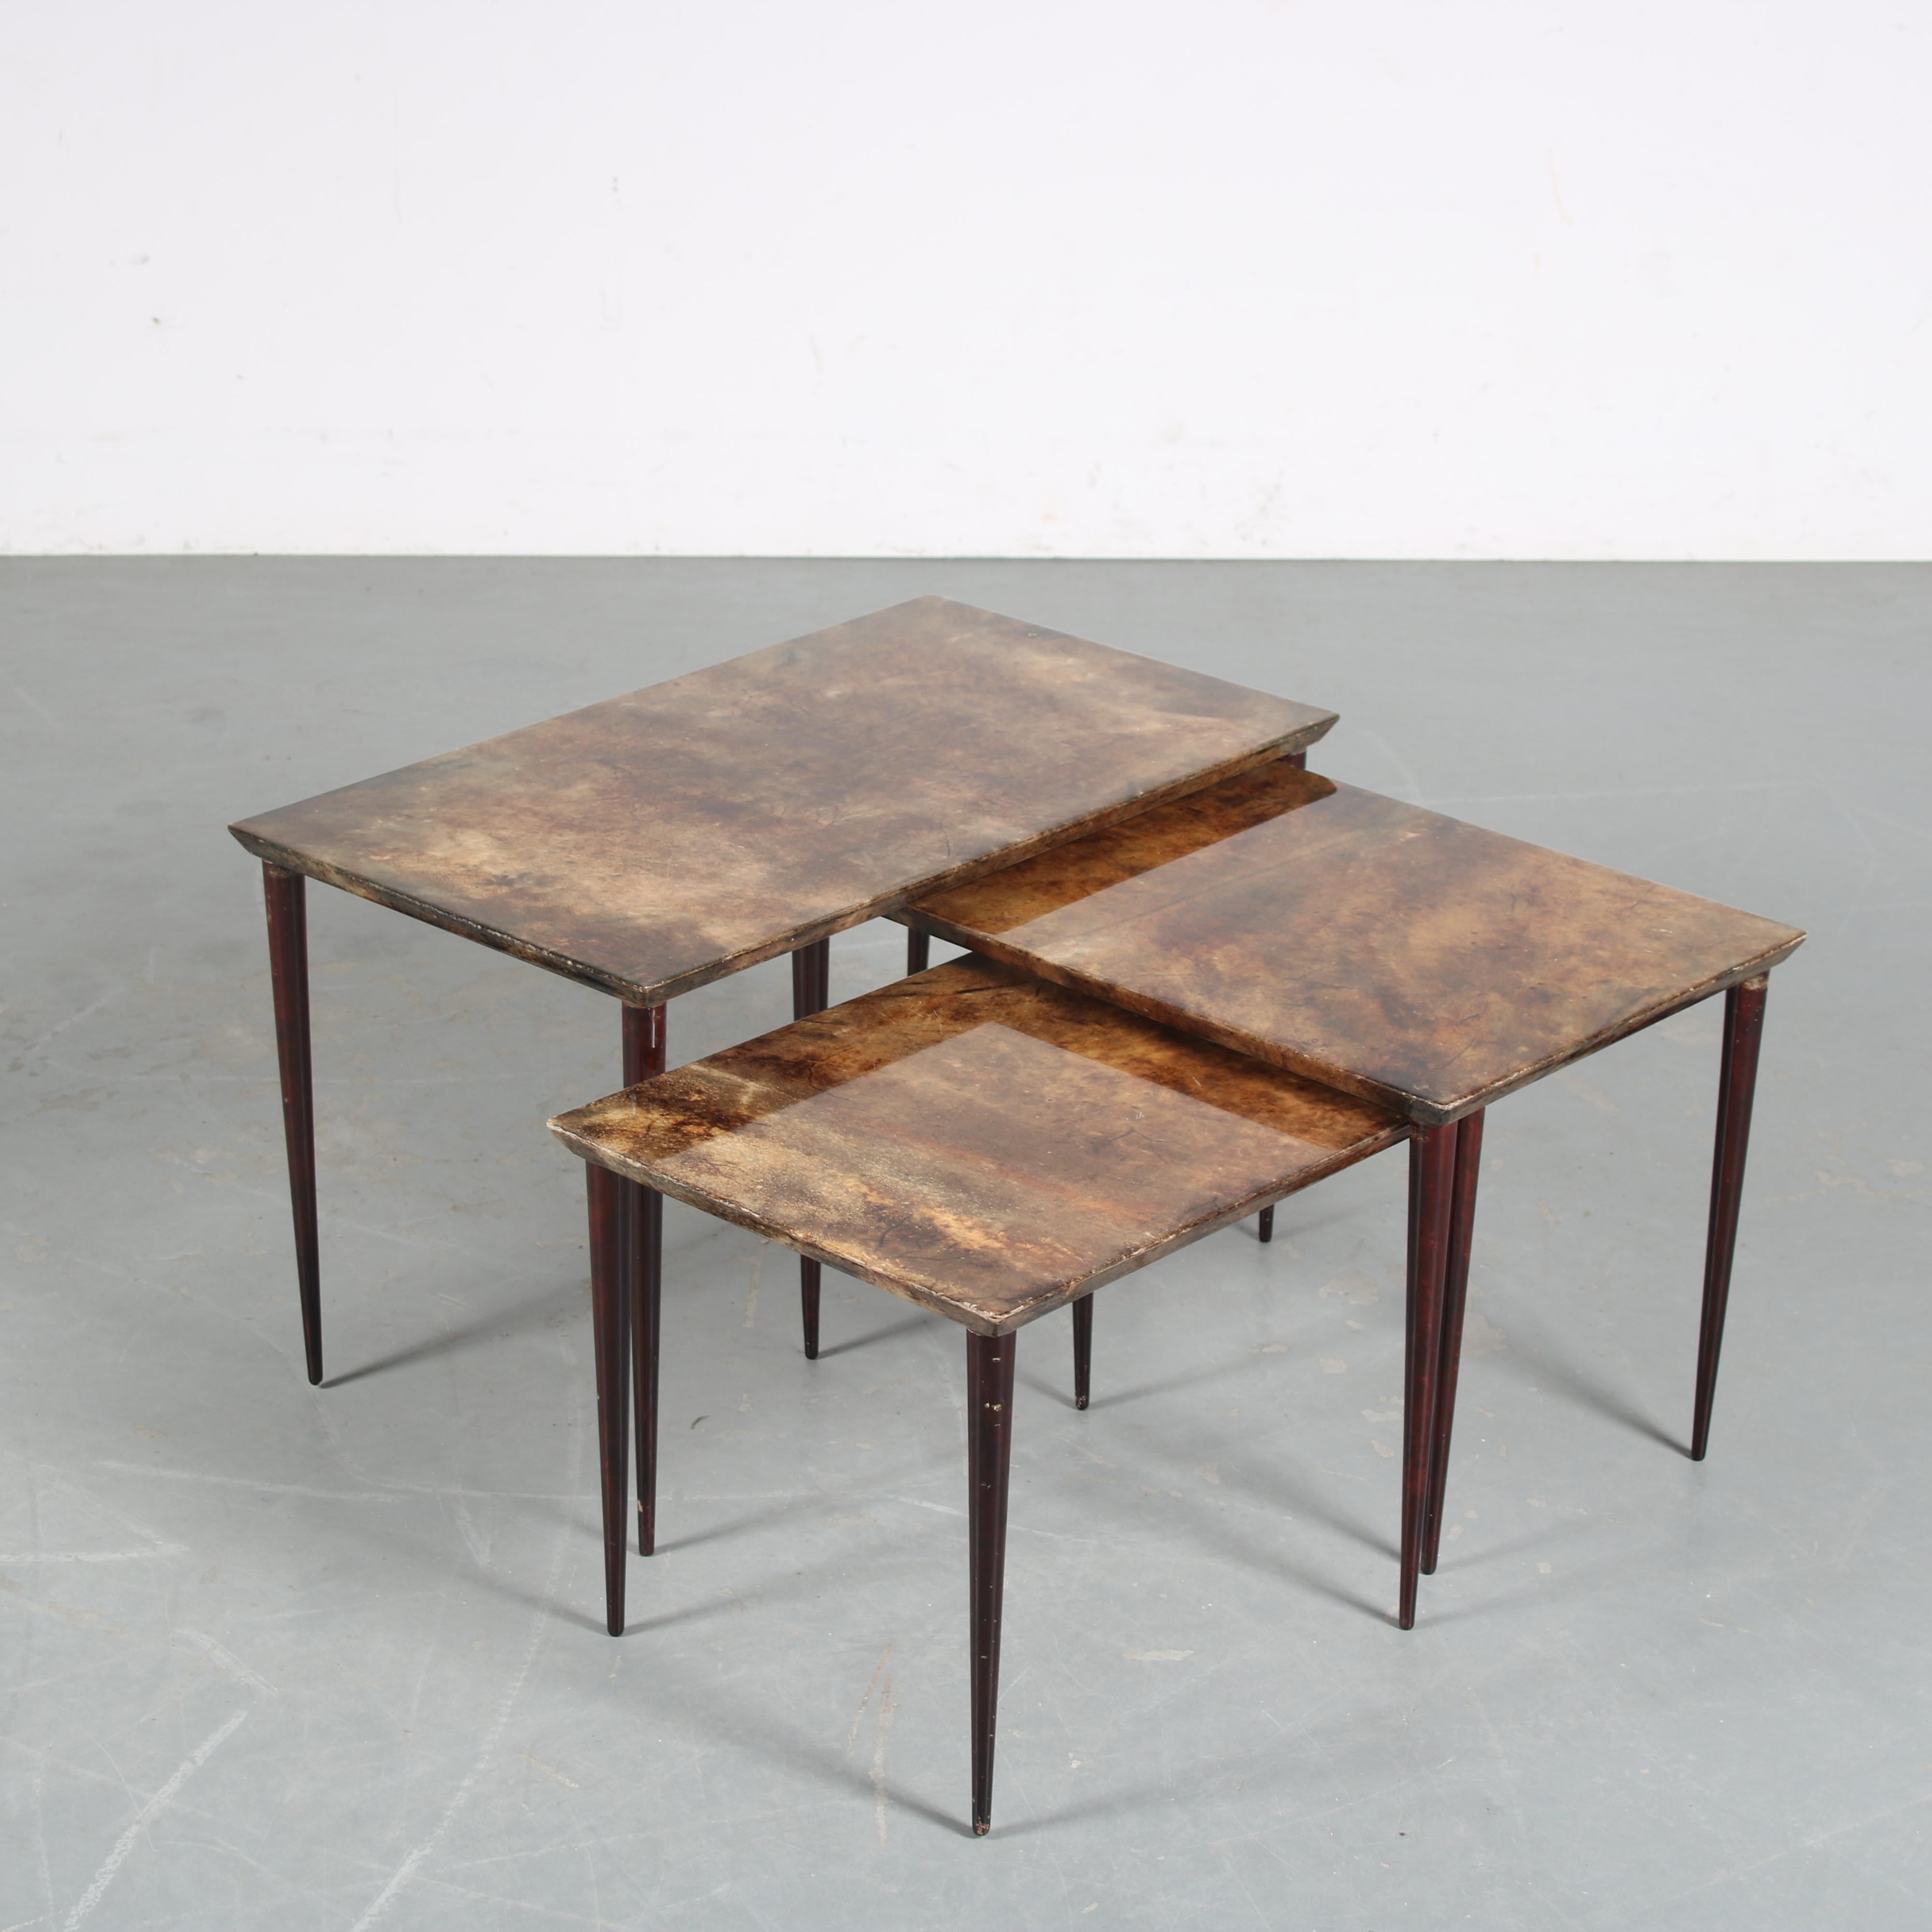 Aldo Tura Nesting Tables from Italy, 1950 For Sale 2